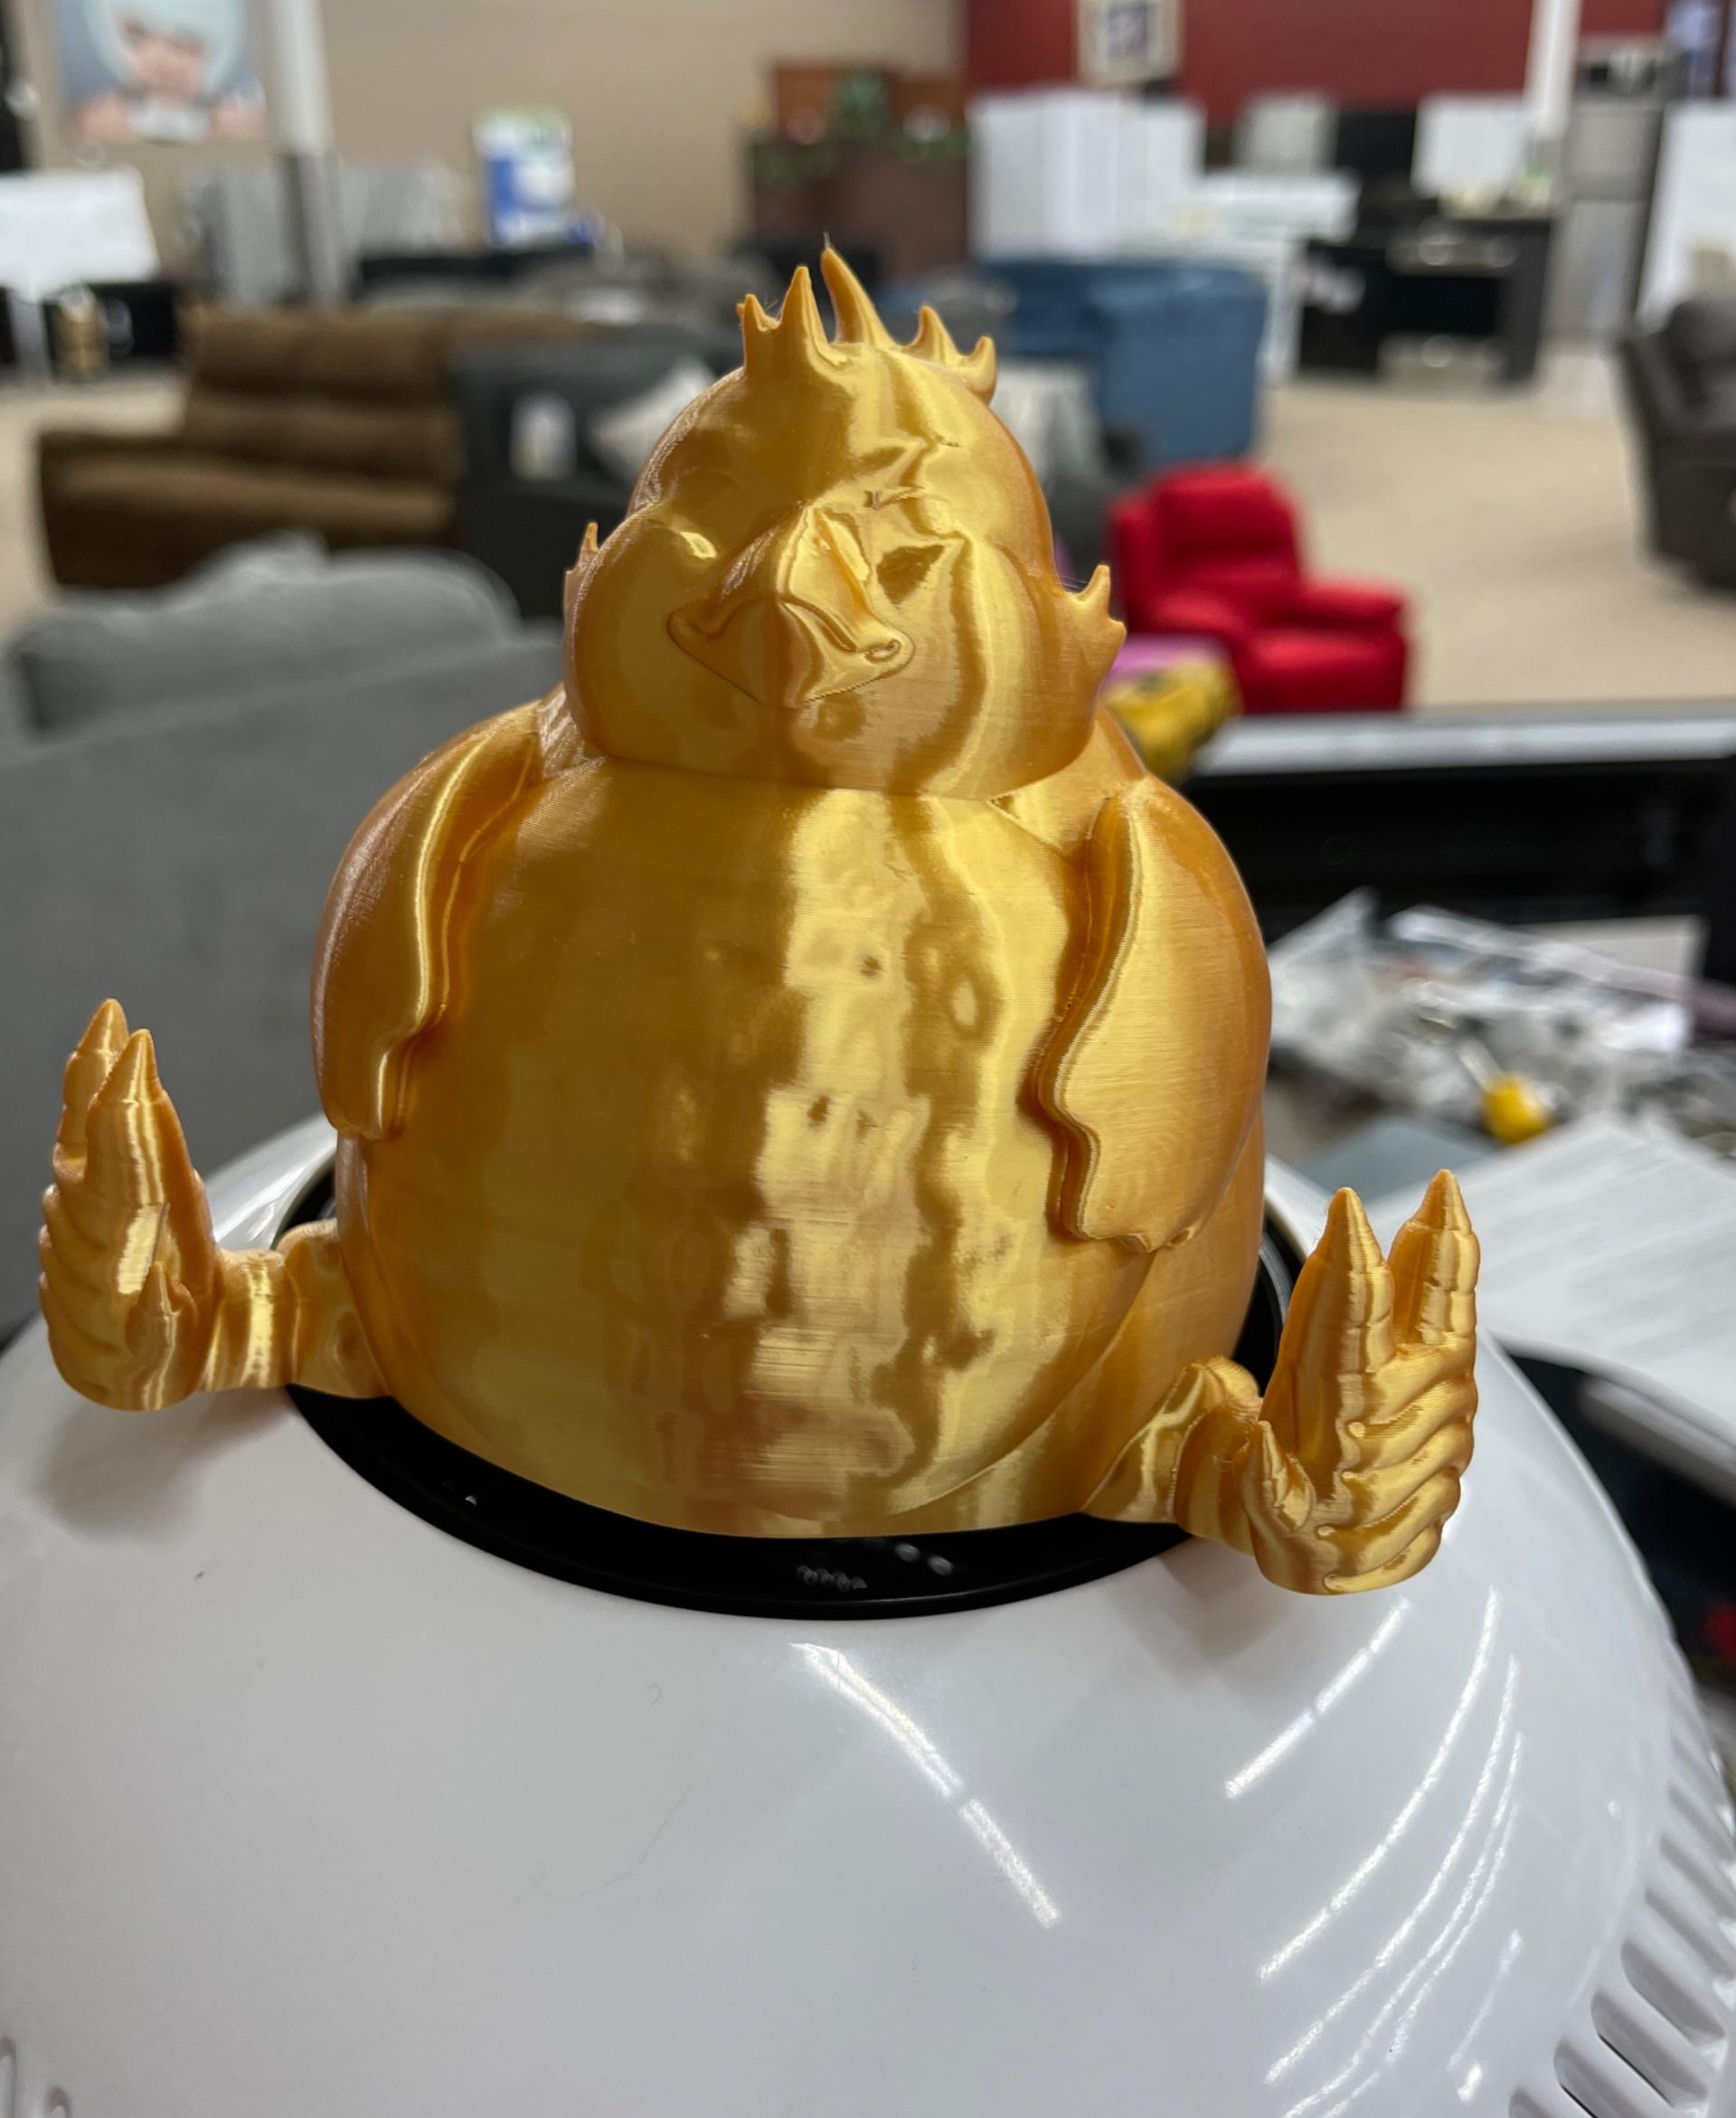 Chubby Chocobo - Print in place! - Printed this amazing fat chocobo  - 3d model